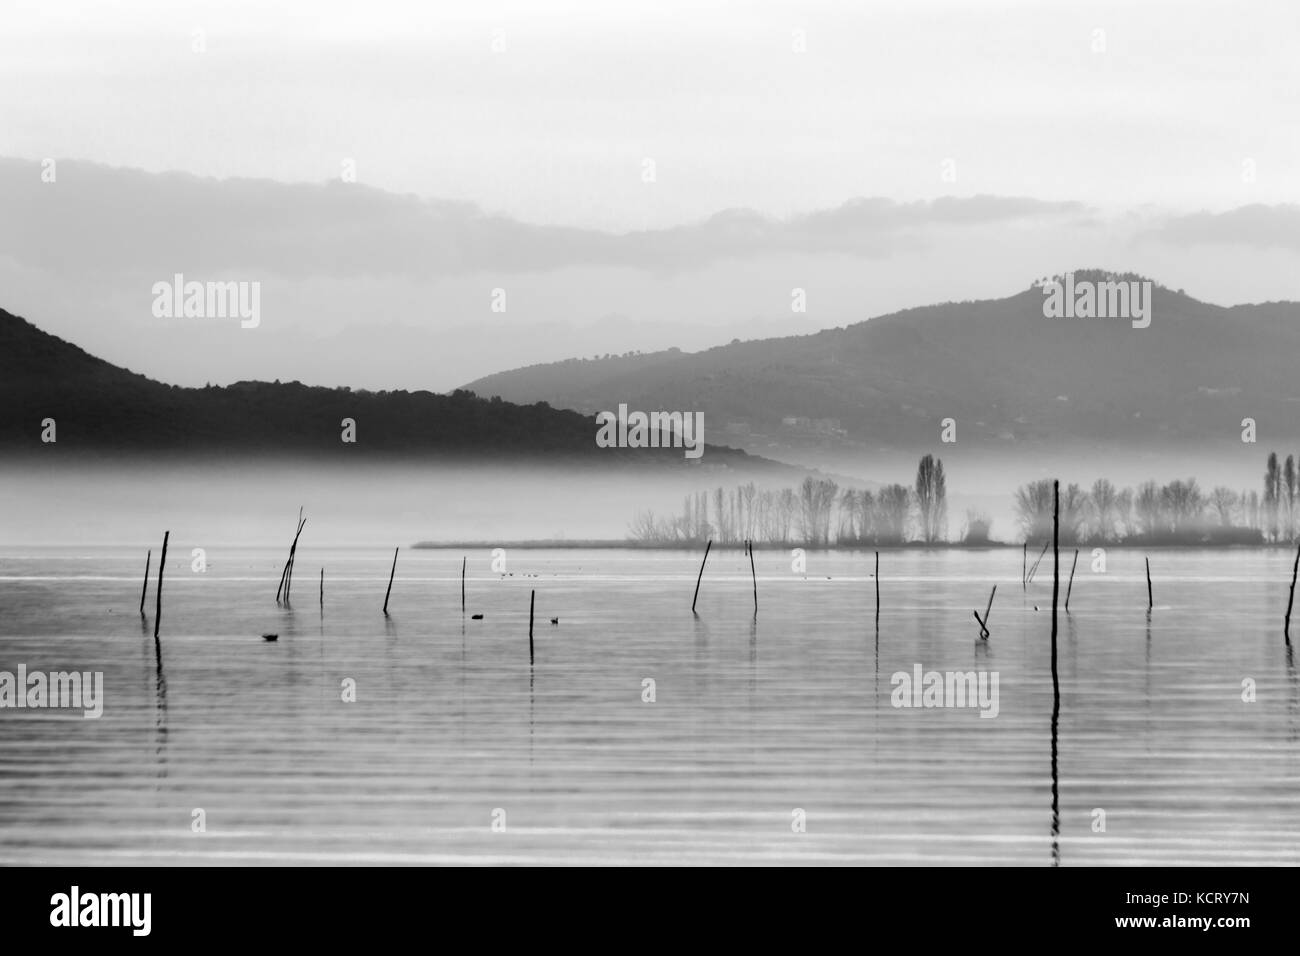 A lake at dusk, with soft tones, distant hills and mountains,and some plants and wooden poles in the middle of mist Stock Photo